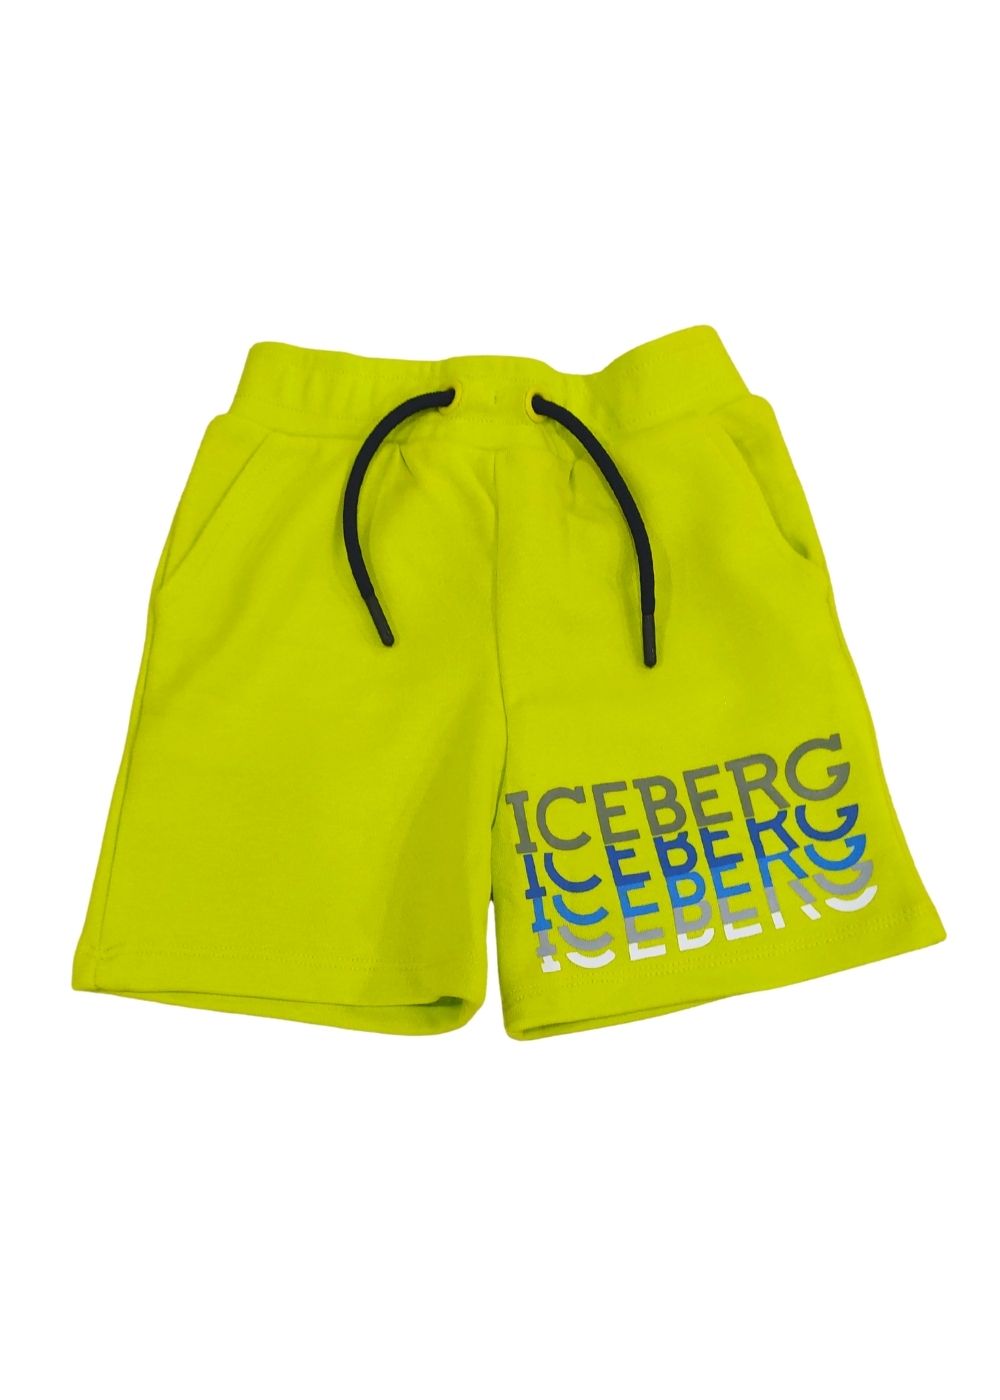 Featured image for “Iceberg Bermuda lime con logo”